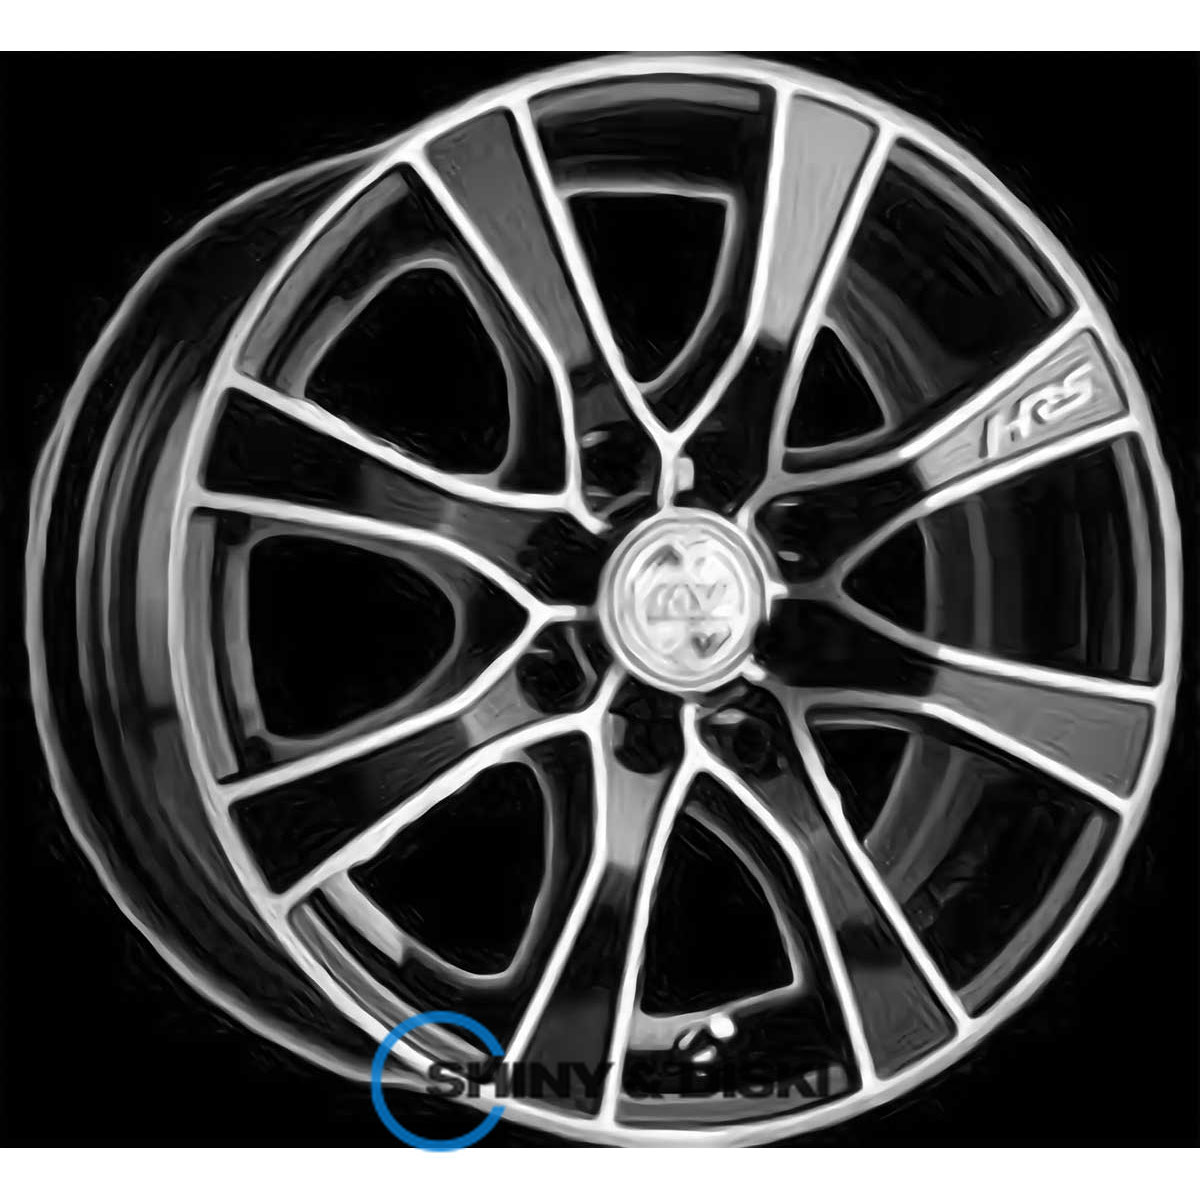 rs tuning h-476 bkfp r14 w6 pcd4x114.3 et38 dia67.1